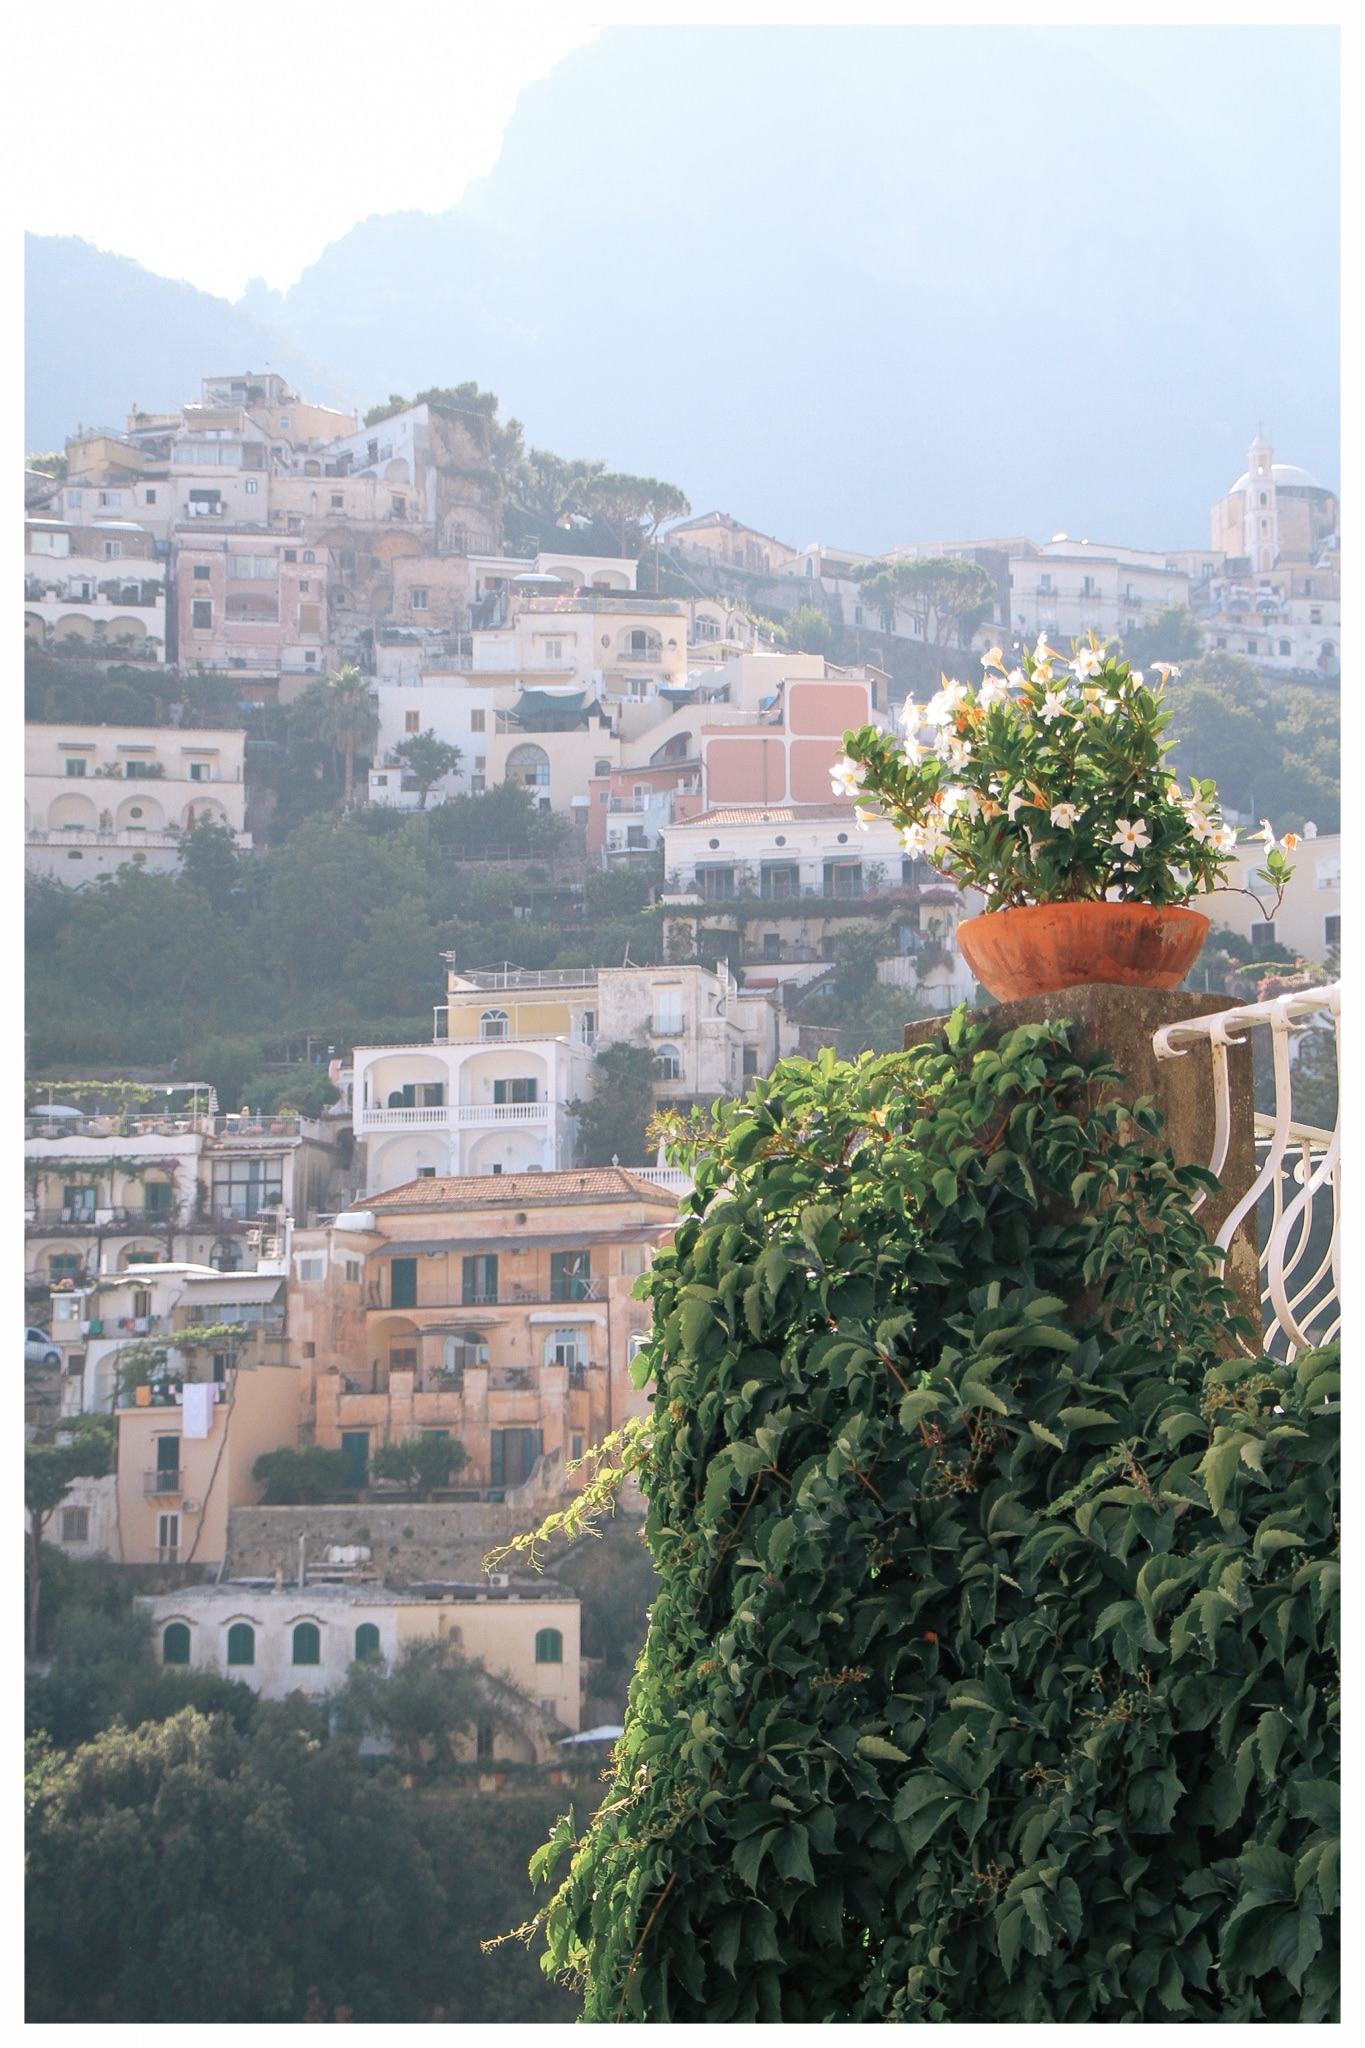 My Complete Guide to the Best of Positano, Italy - Journal